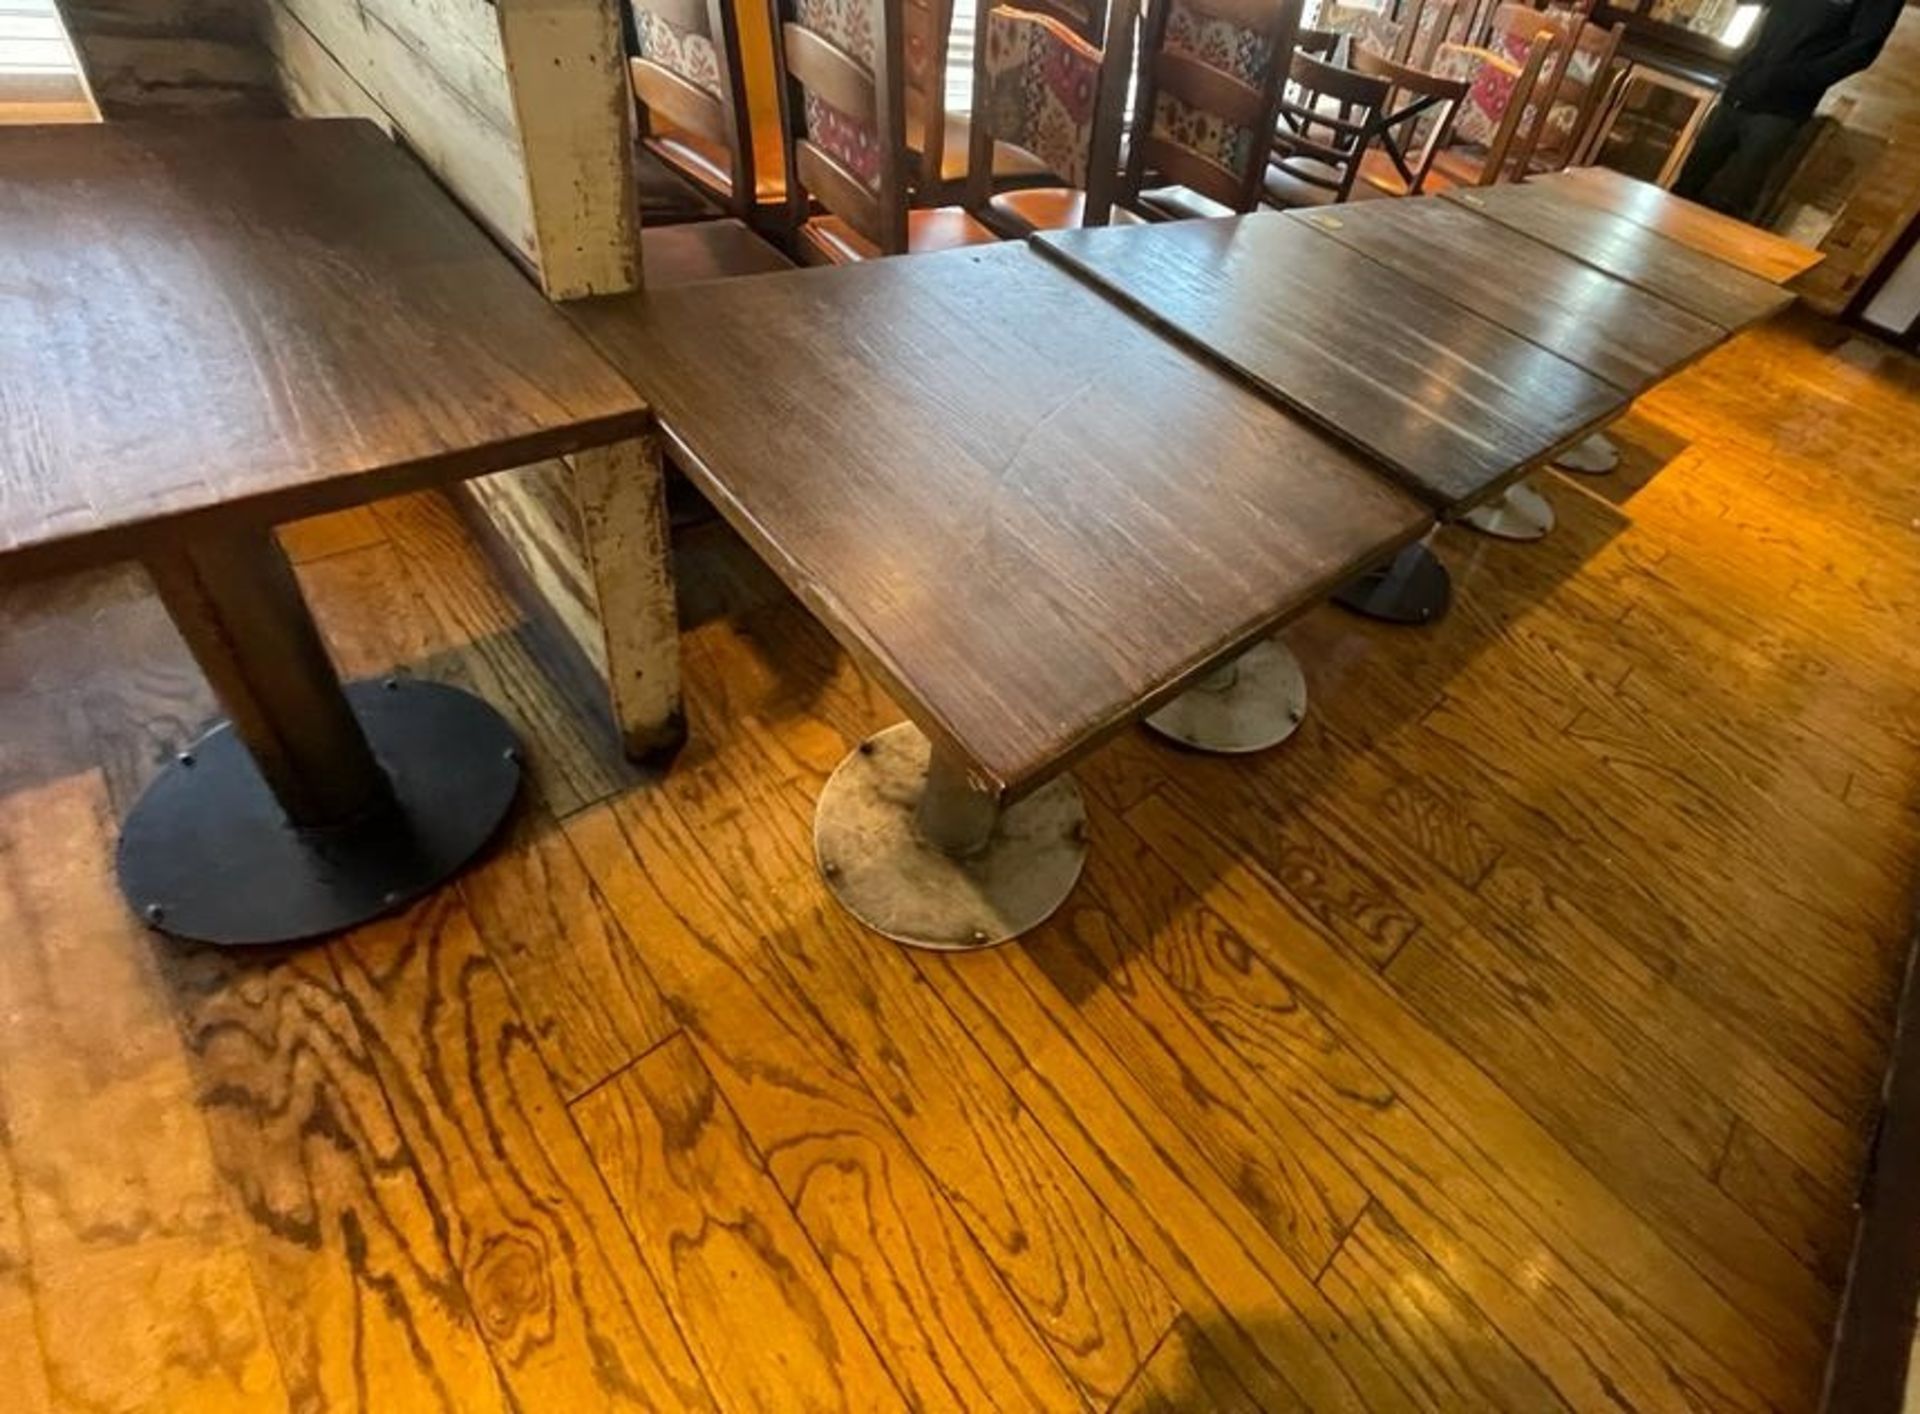 4 x Restaurant Dining Tables Featuring Industrial Style Bases and Wood Tops - Dimensions: H73 x - Image 3 of 9